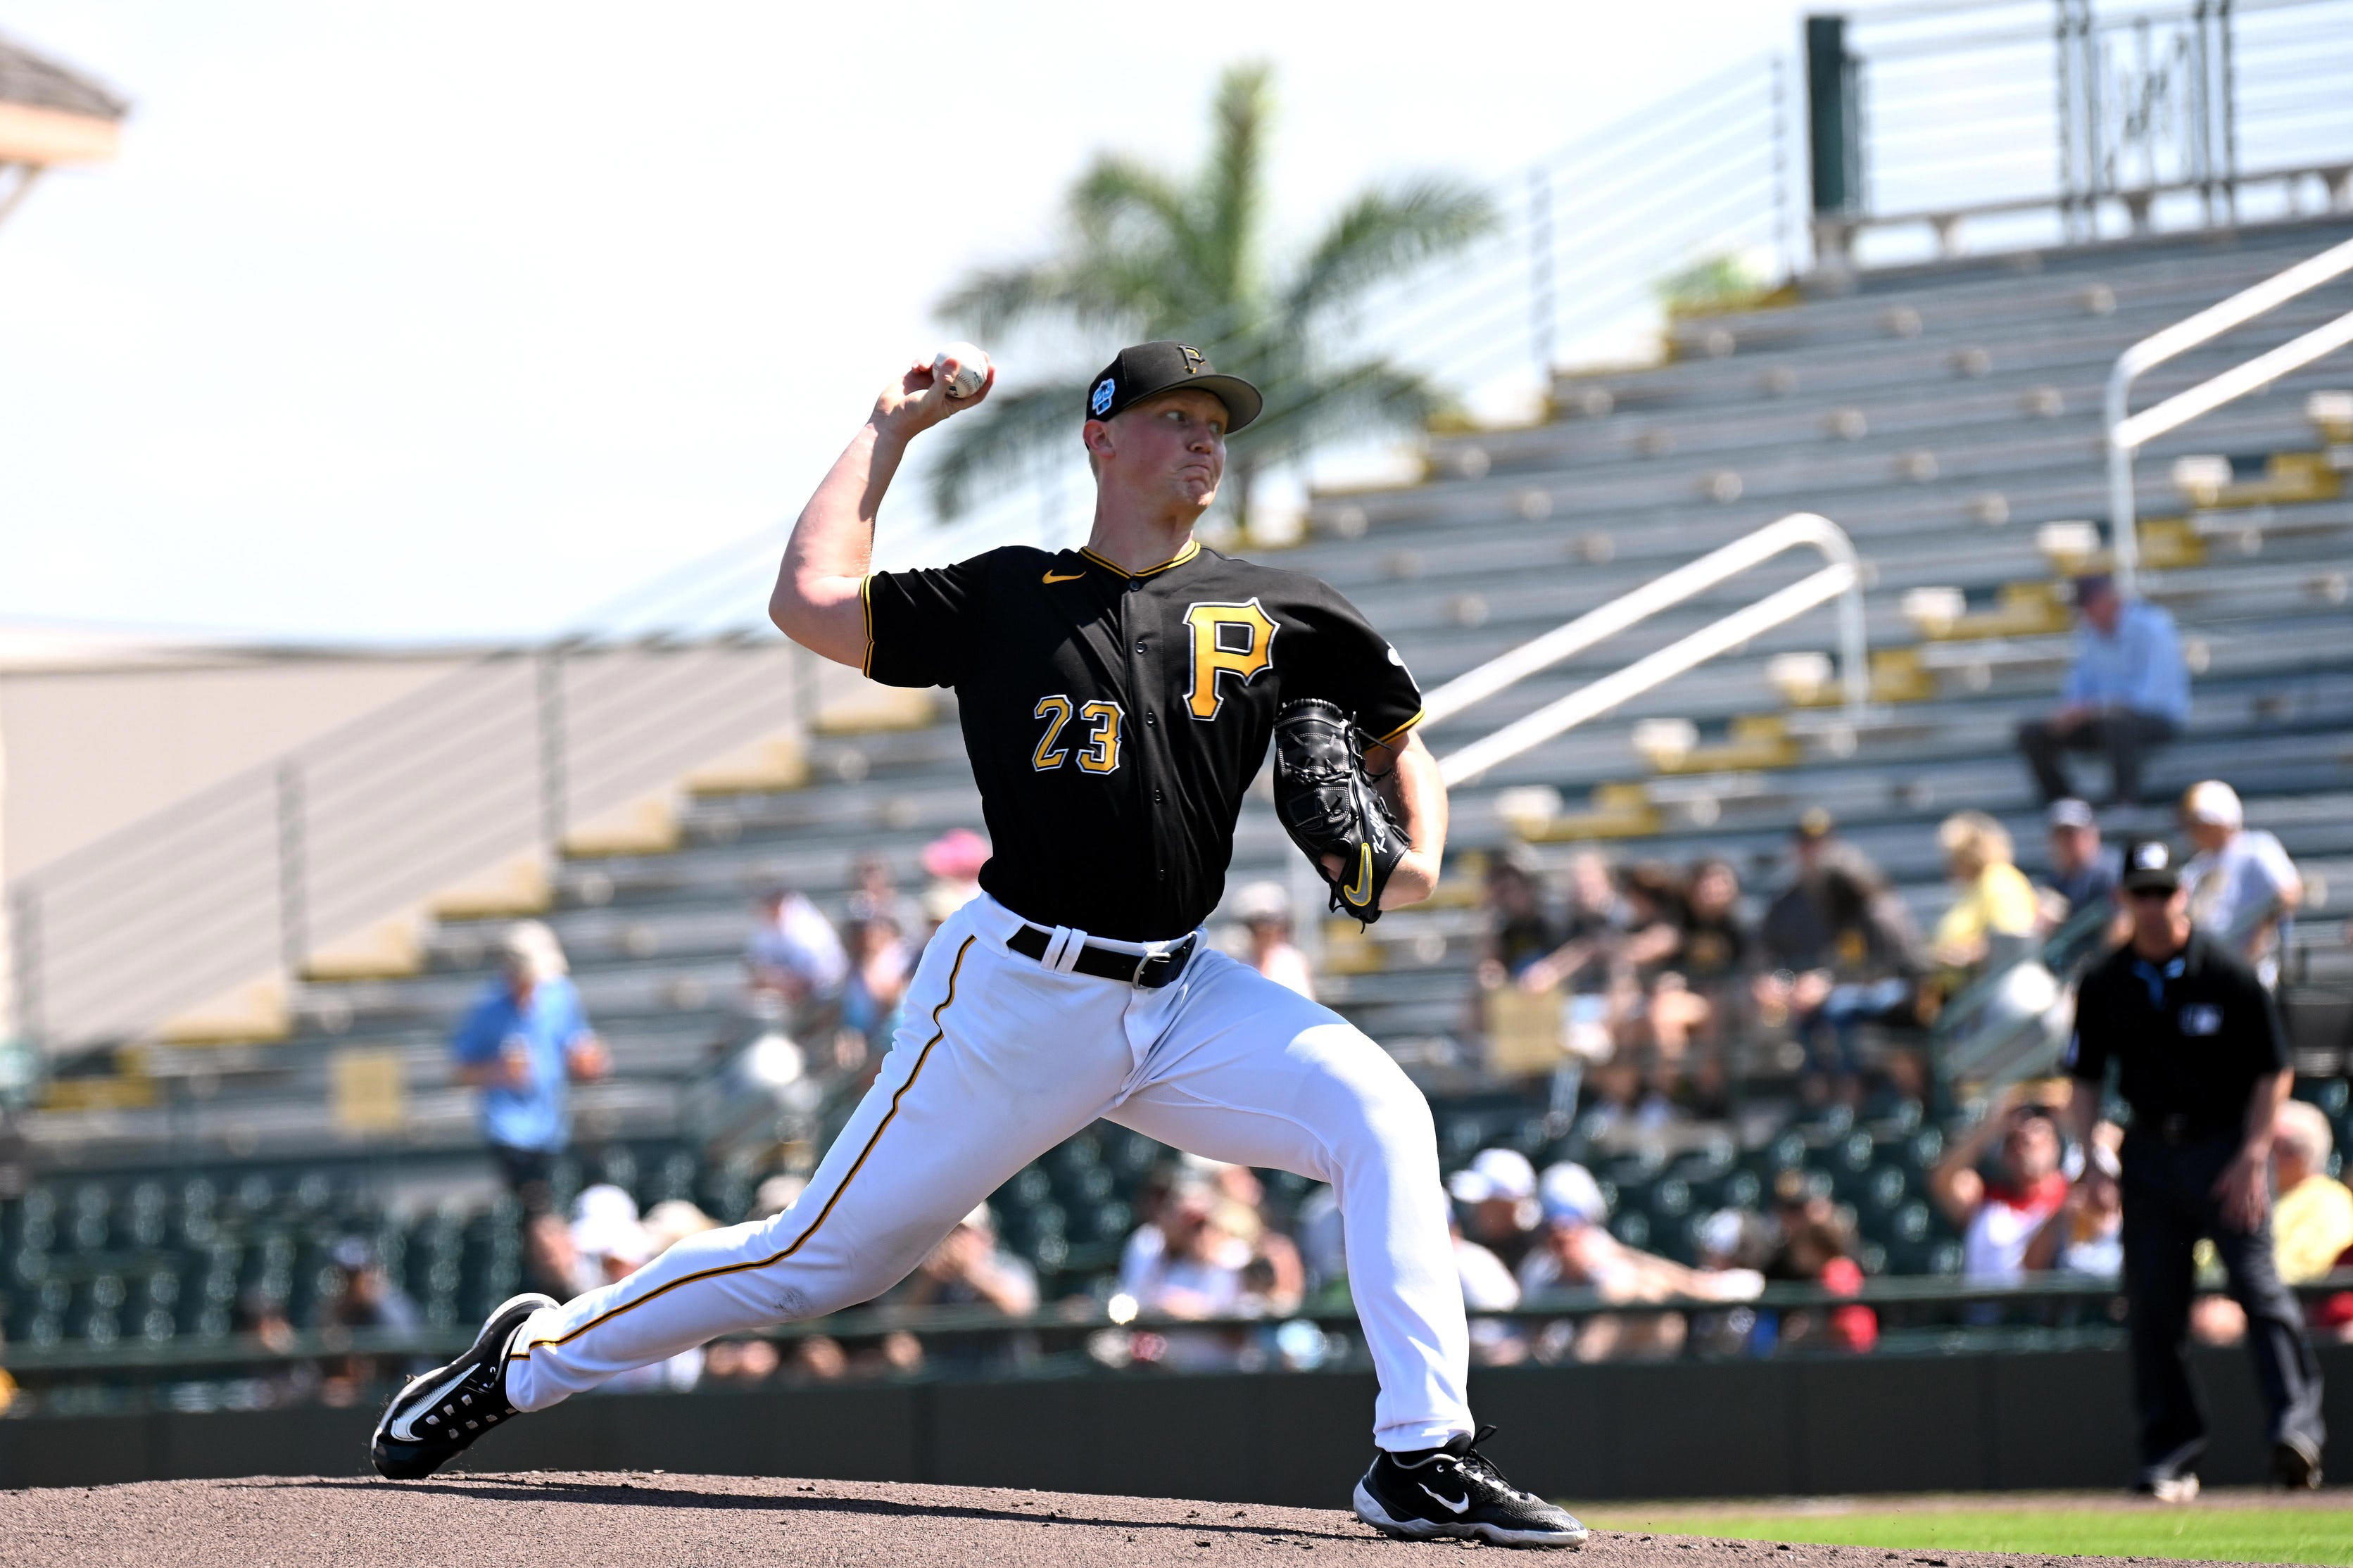 Pirates Spring Training schedule releasedYanks & Sox at home once